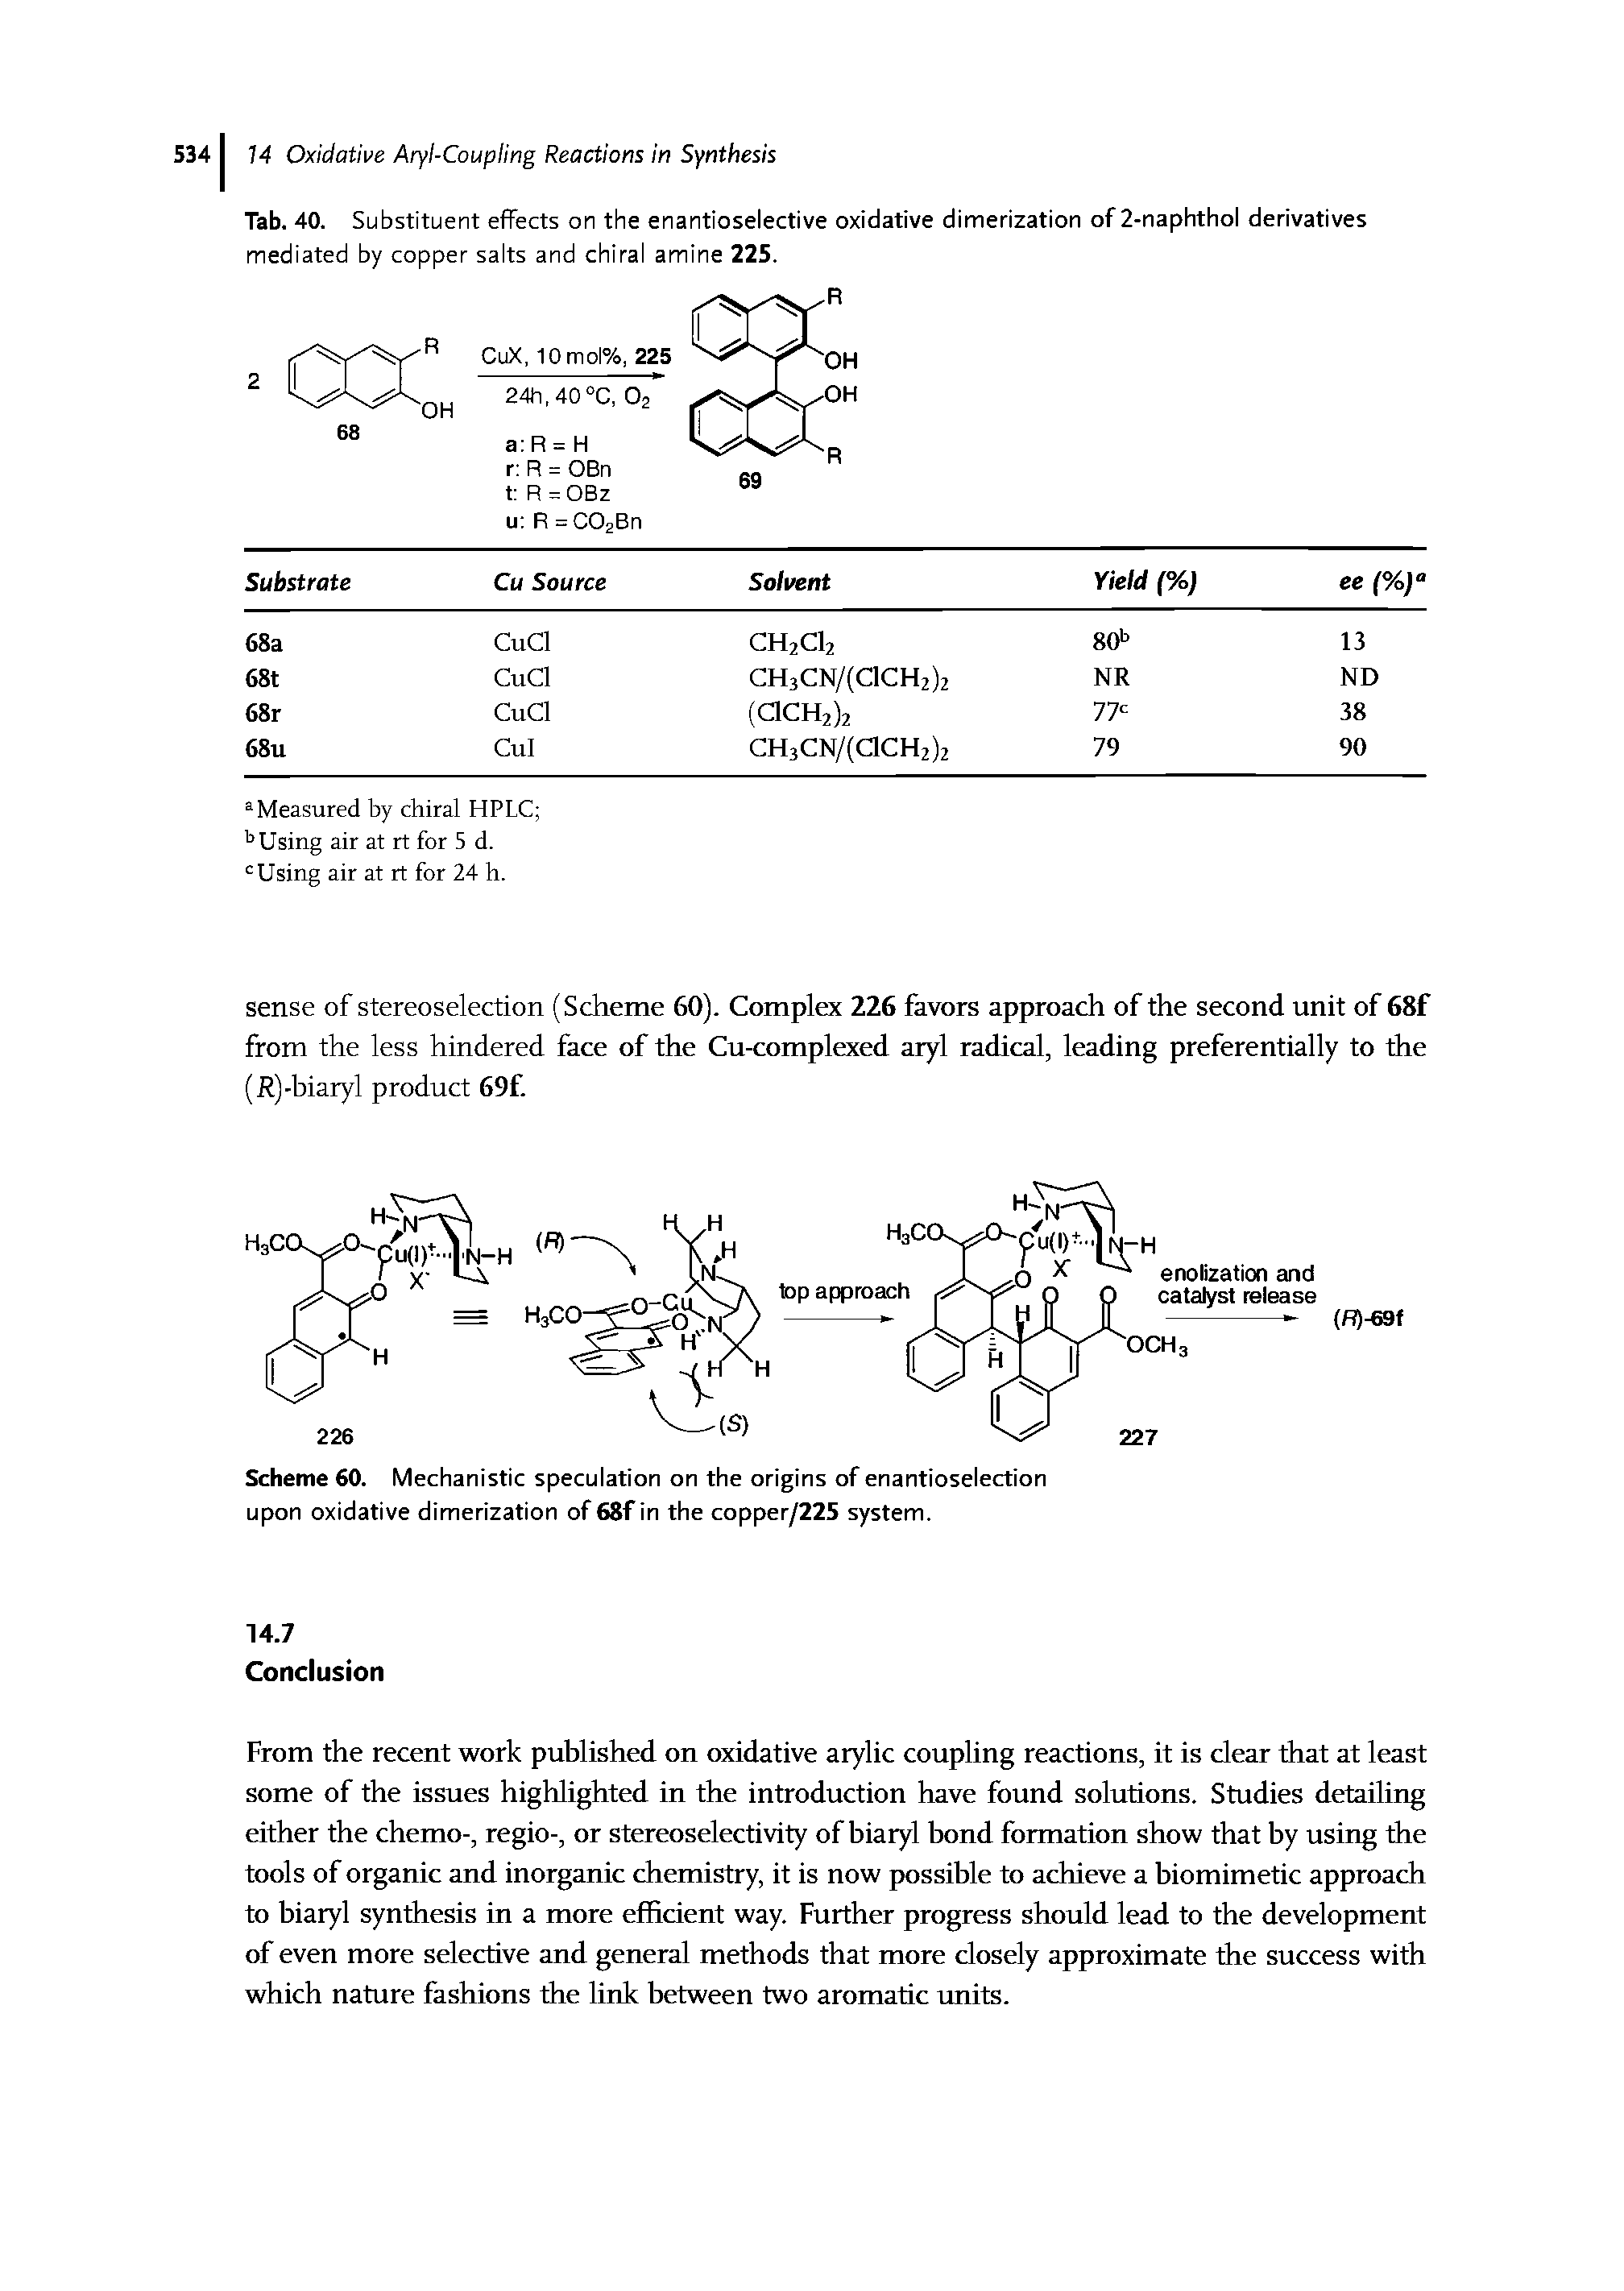 Scheme 60. Mechanistic speculation on the origins of enantioselection upon oxidative dimerization of 68f in the copper/225 system.